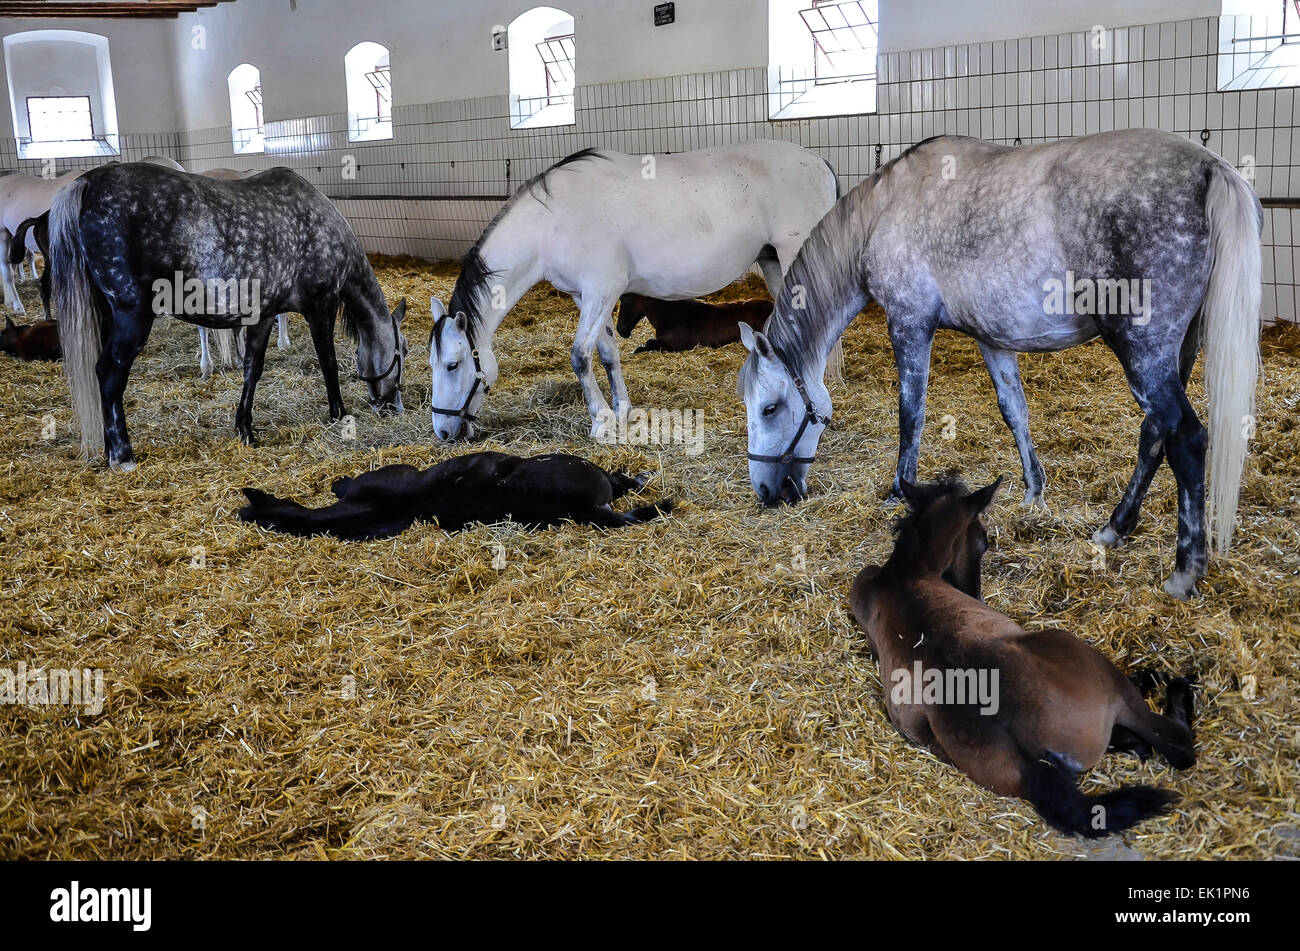 federal stud world famous Lipizzaners Mares and foals Stock Photo